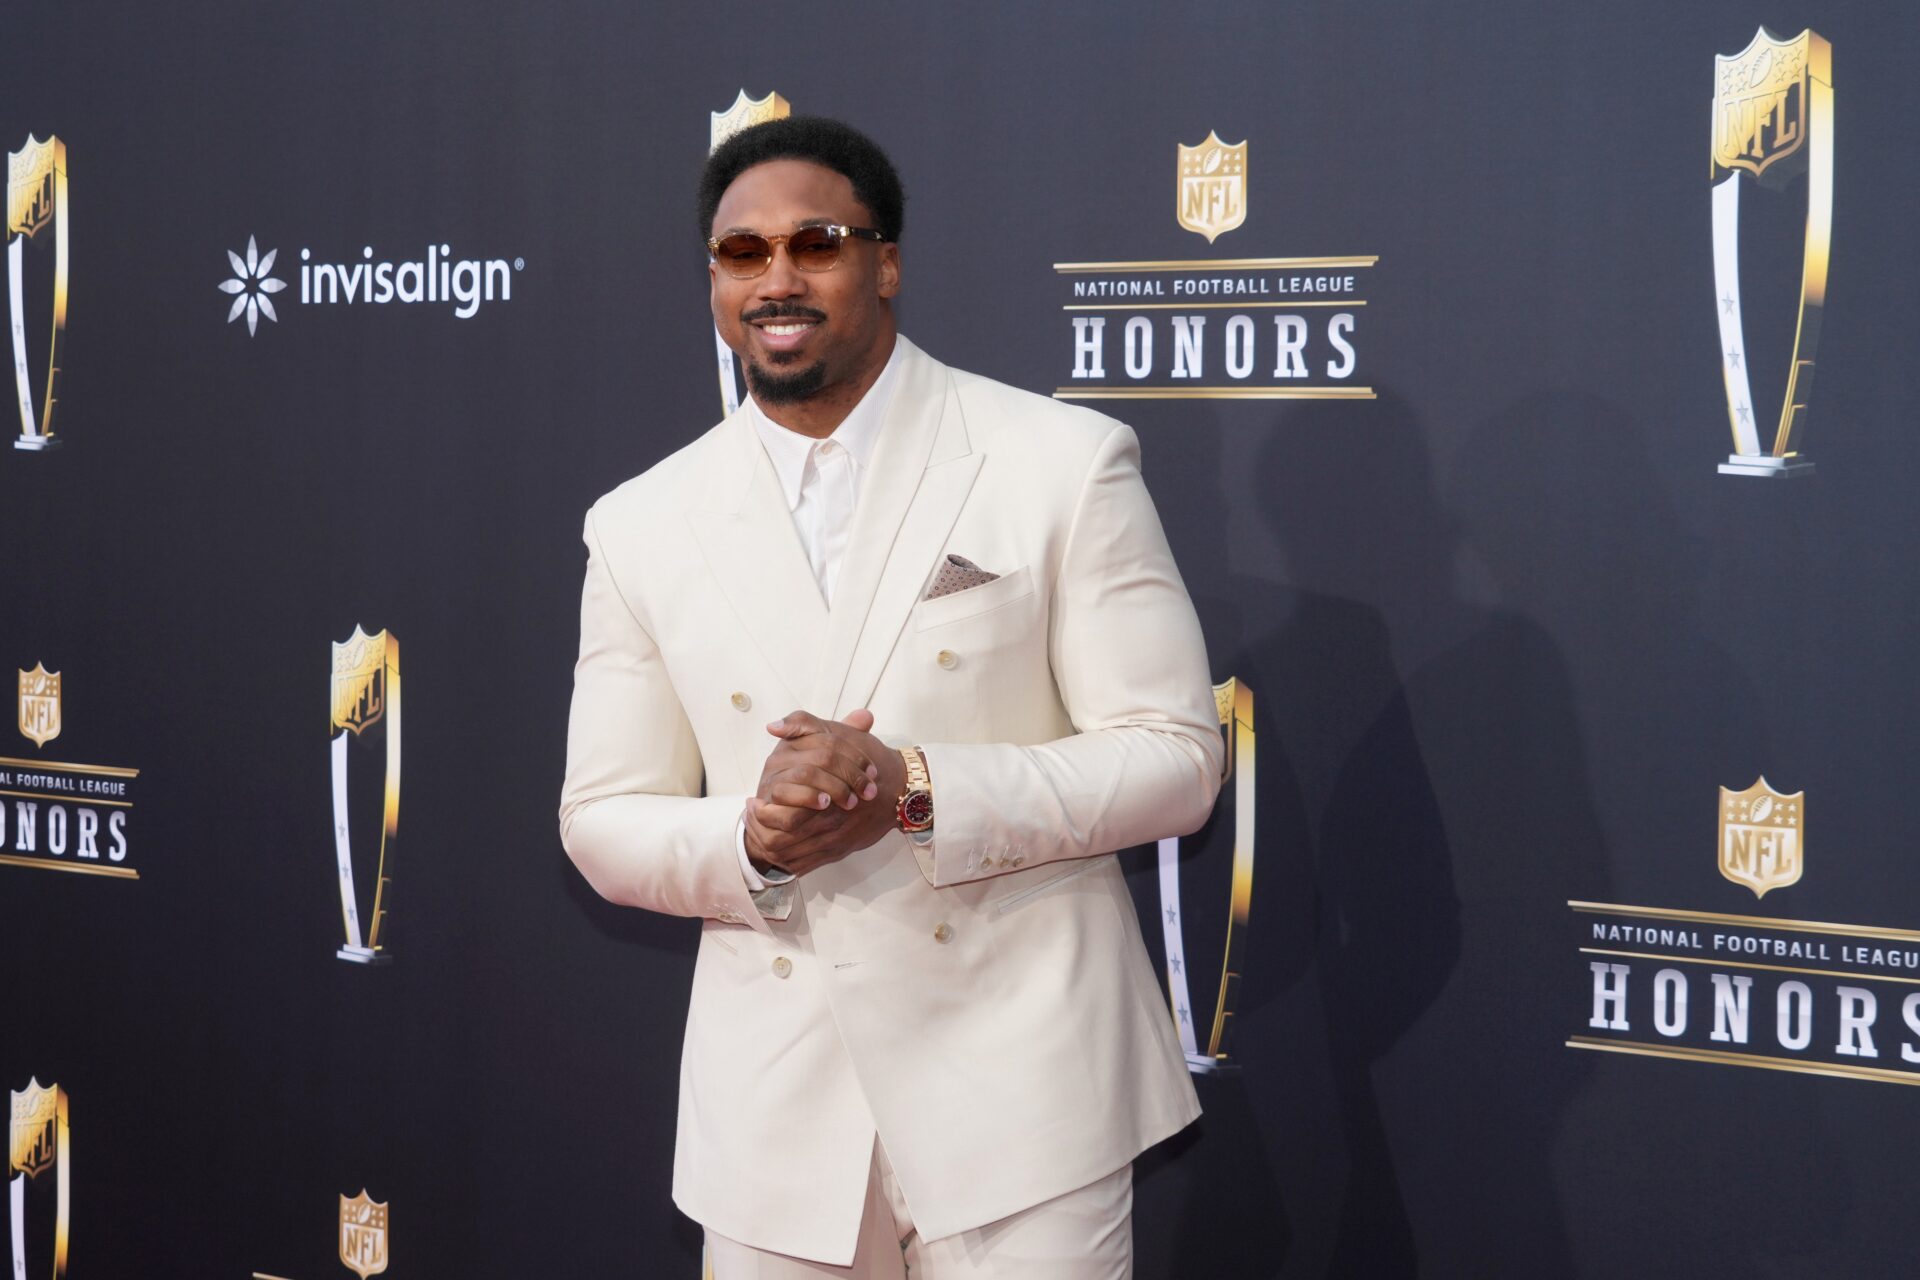 Cleveland Browns defensive end Myles Garrett on the red carpet before the NFL Honors show at Resorts World Theatre.